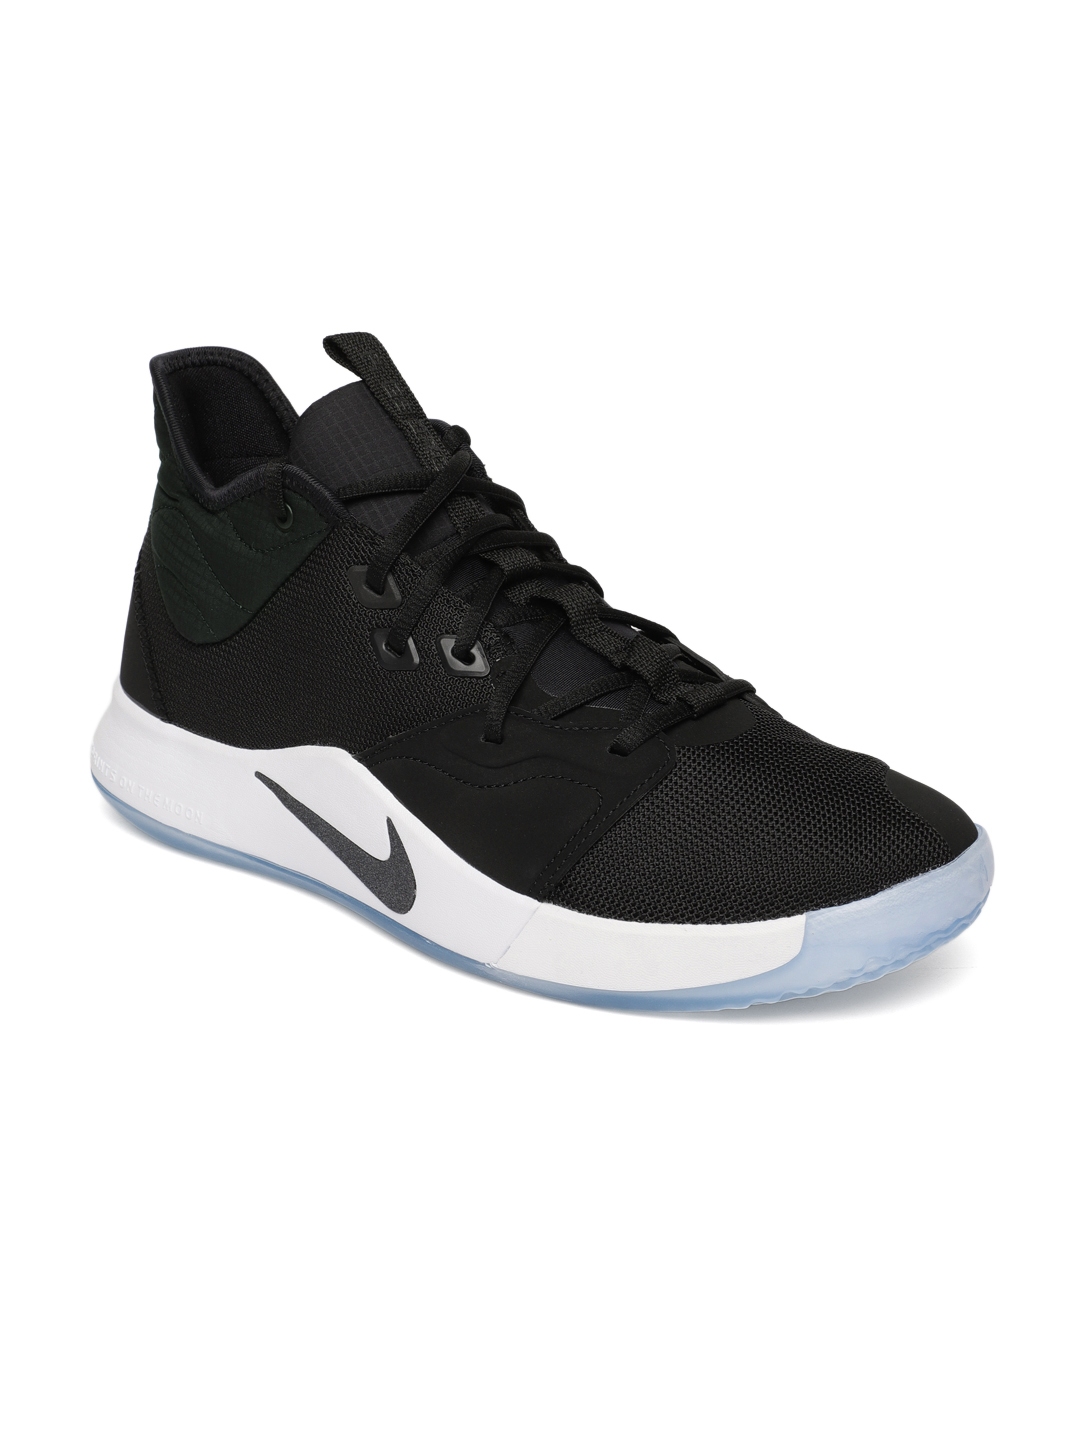 Buy Nike Men Black PG 3 EP Basketball Shoes - Shoes for 8194201 Myntra